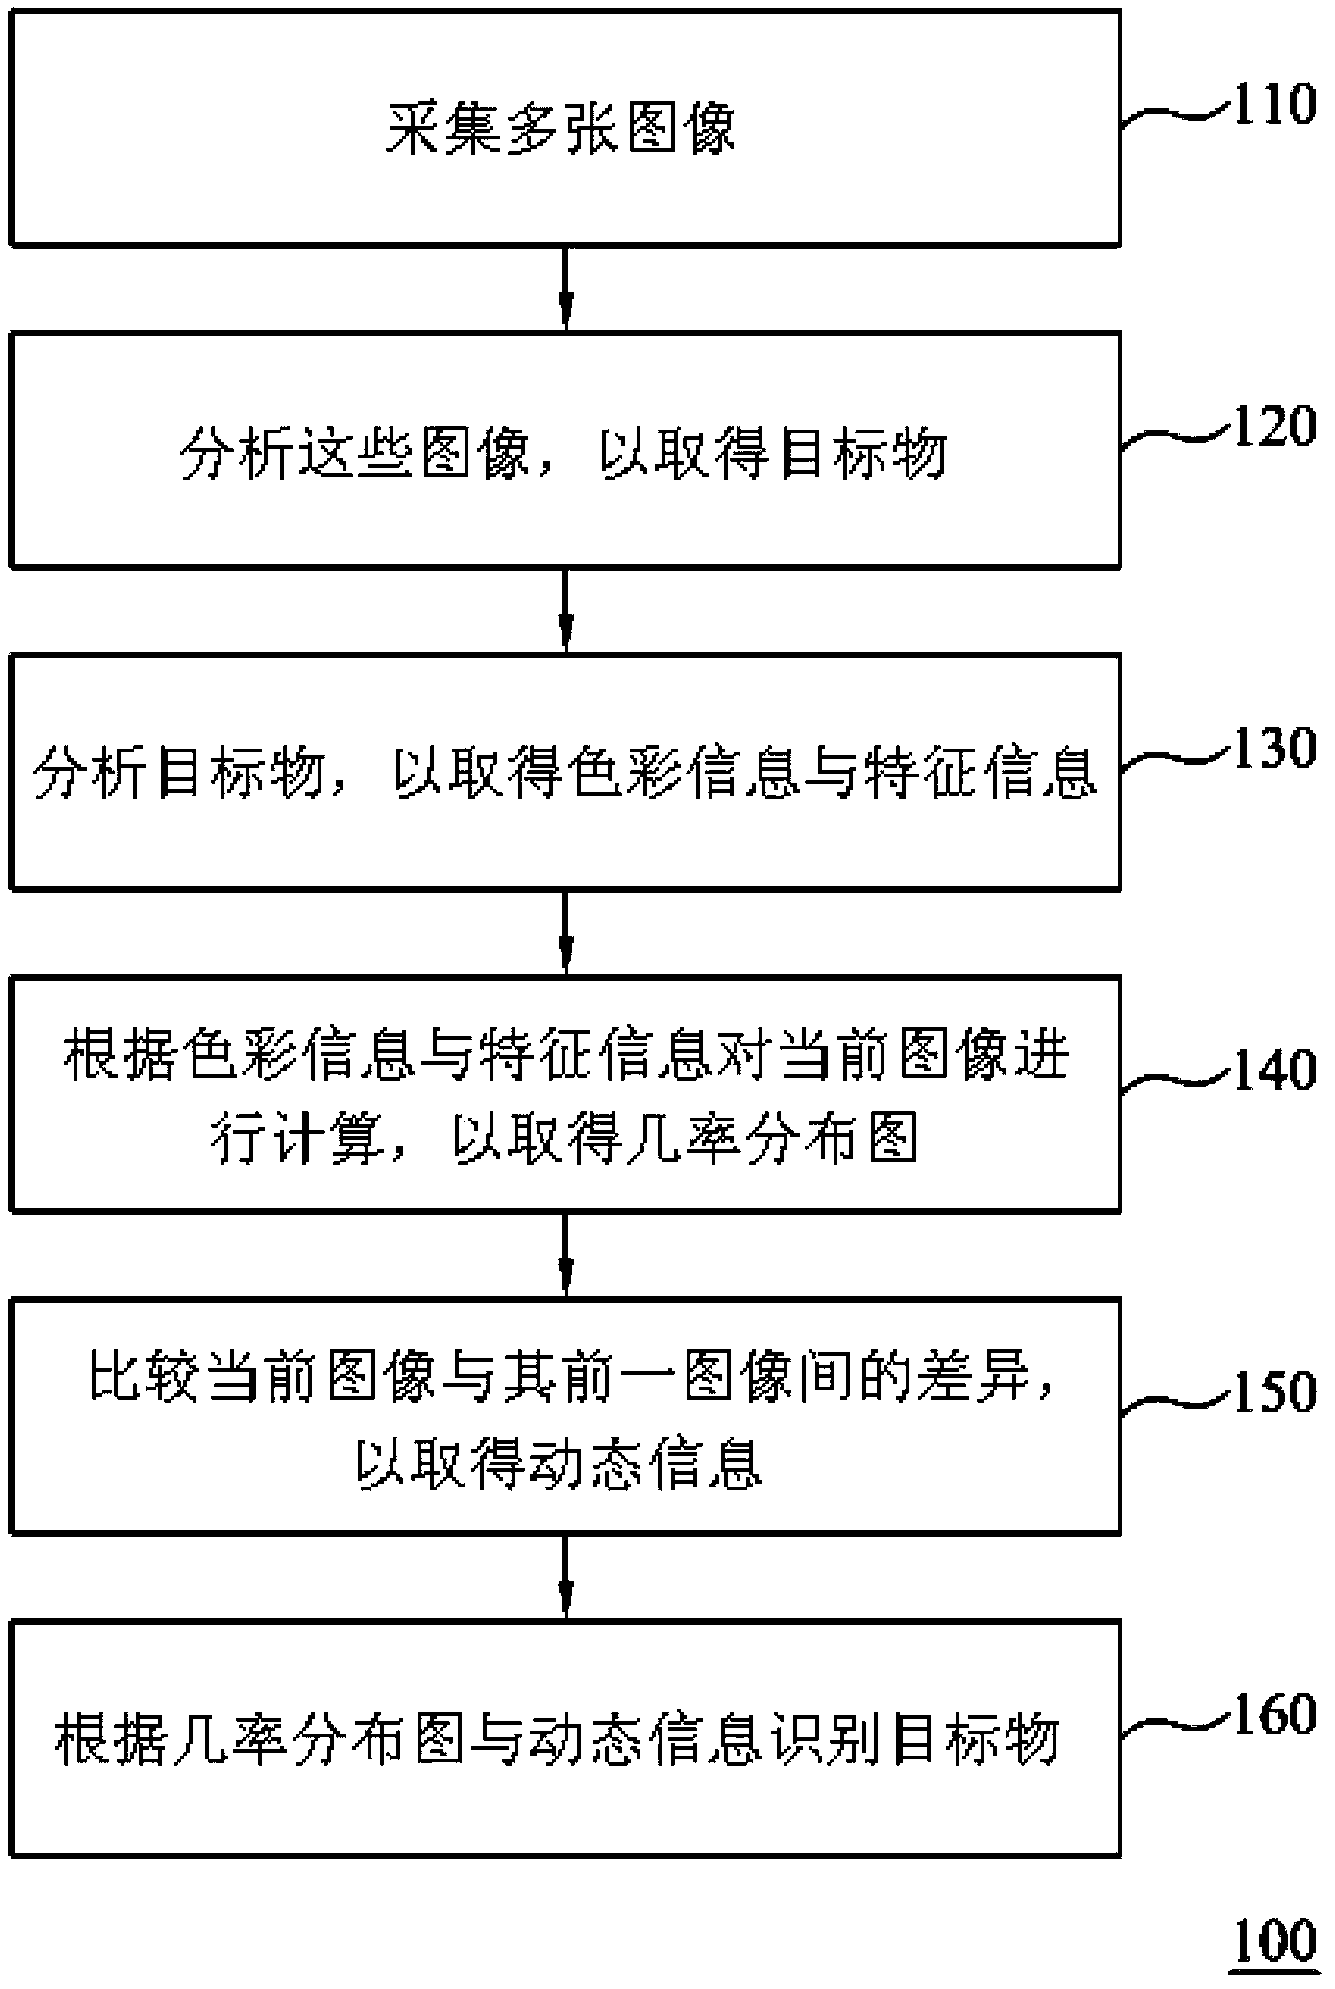 Image recognition system and image recognition method